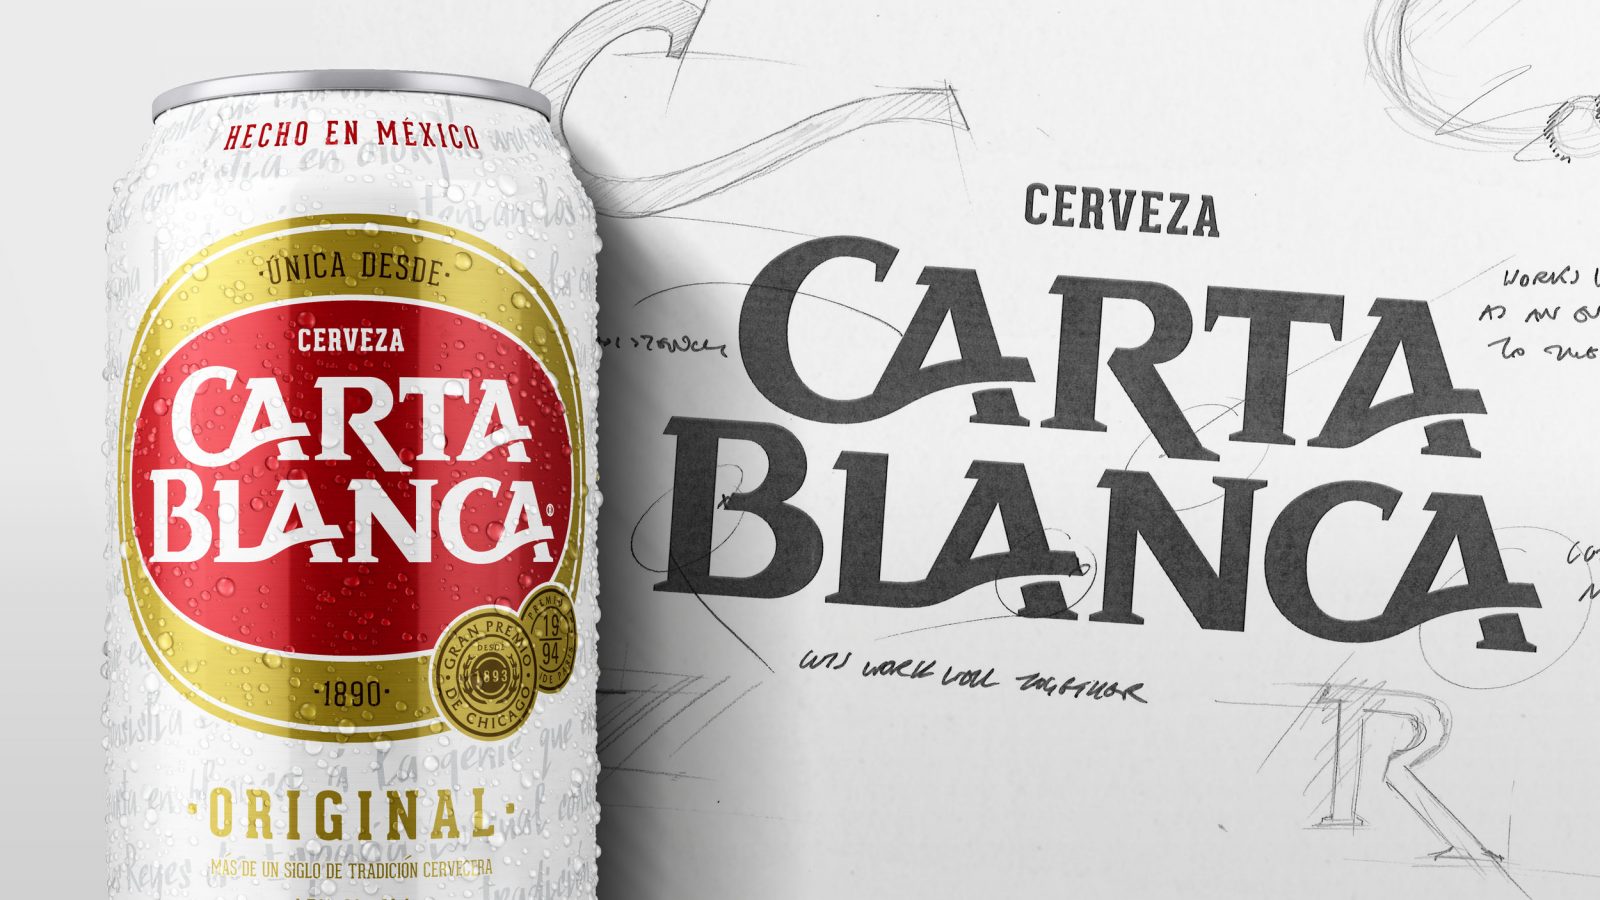 Looking to History, Writing the Future for One of Mexicos Most Famous Beers